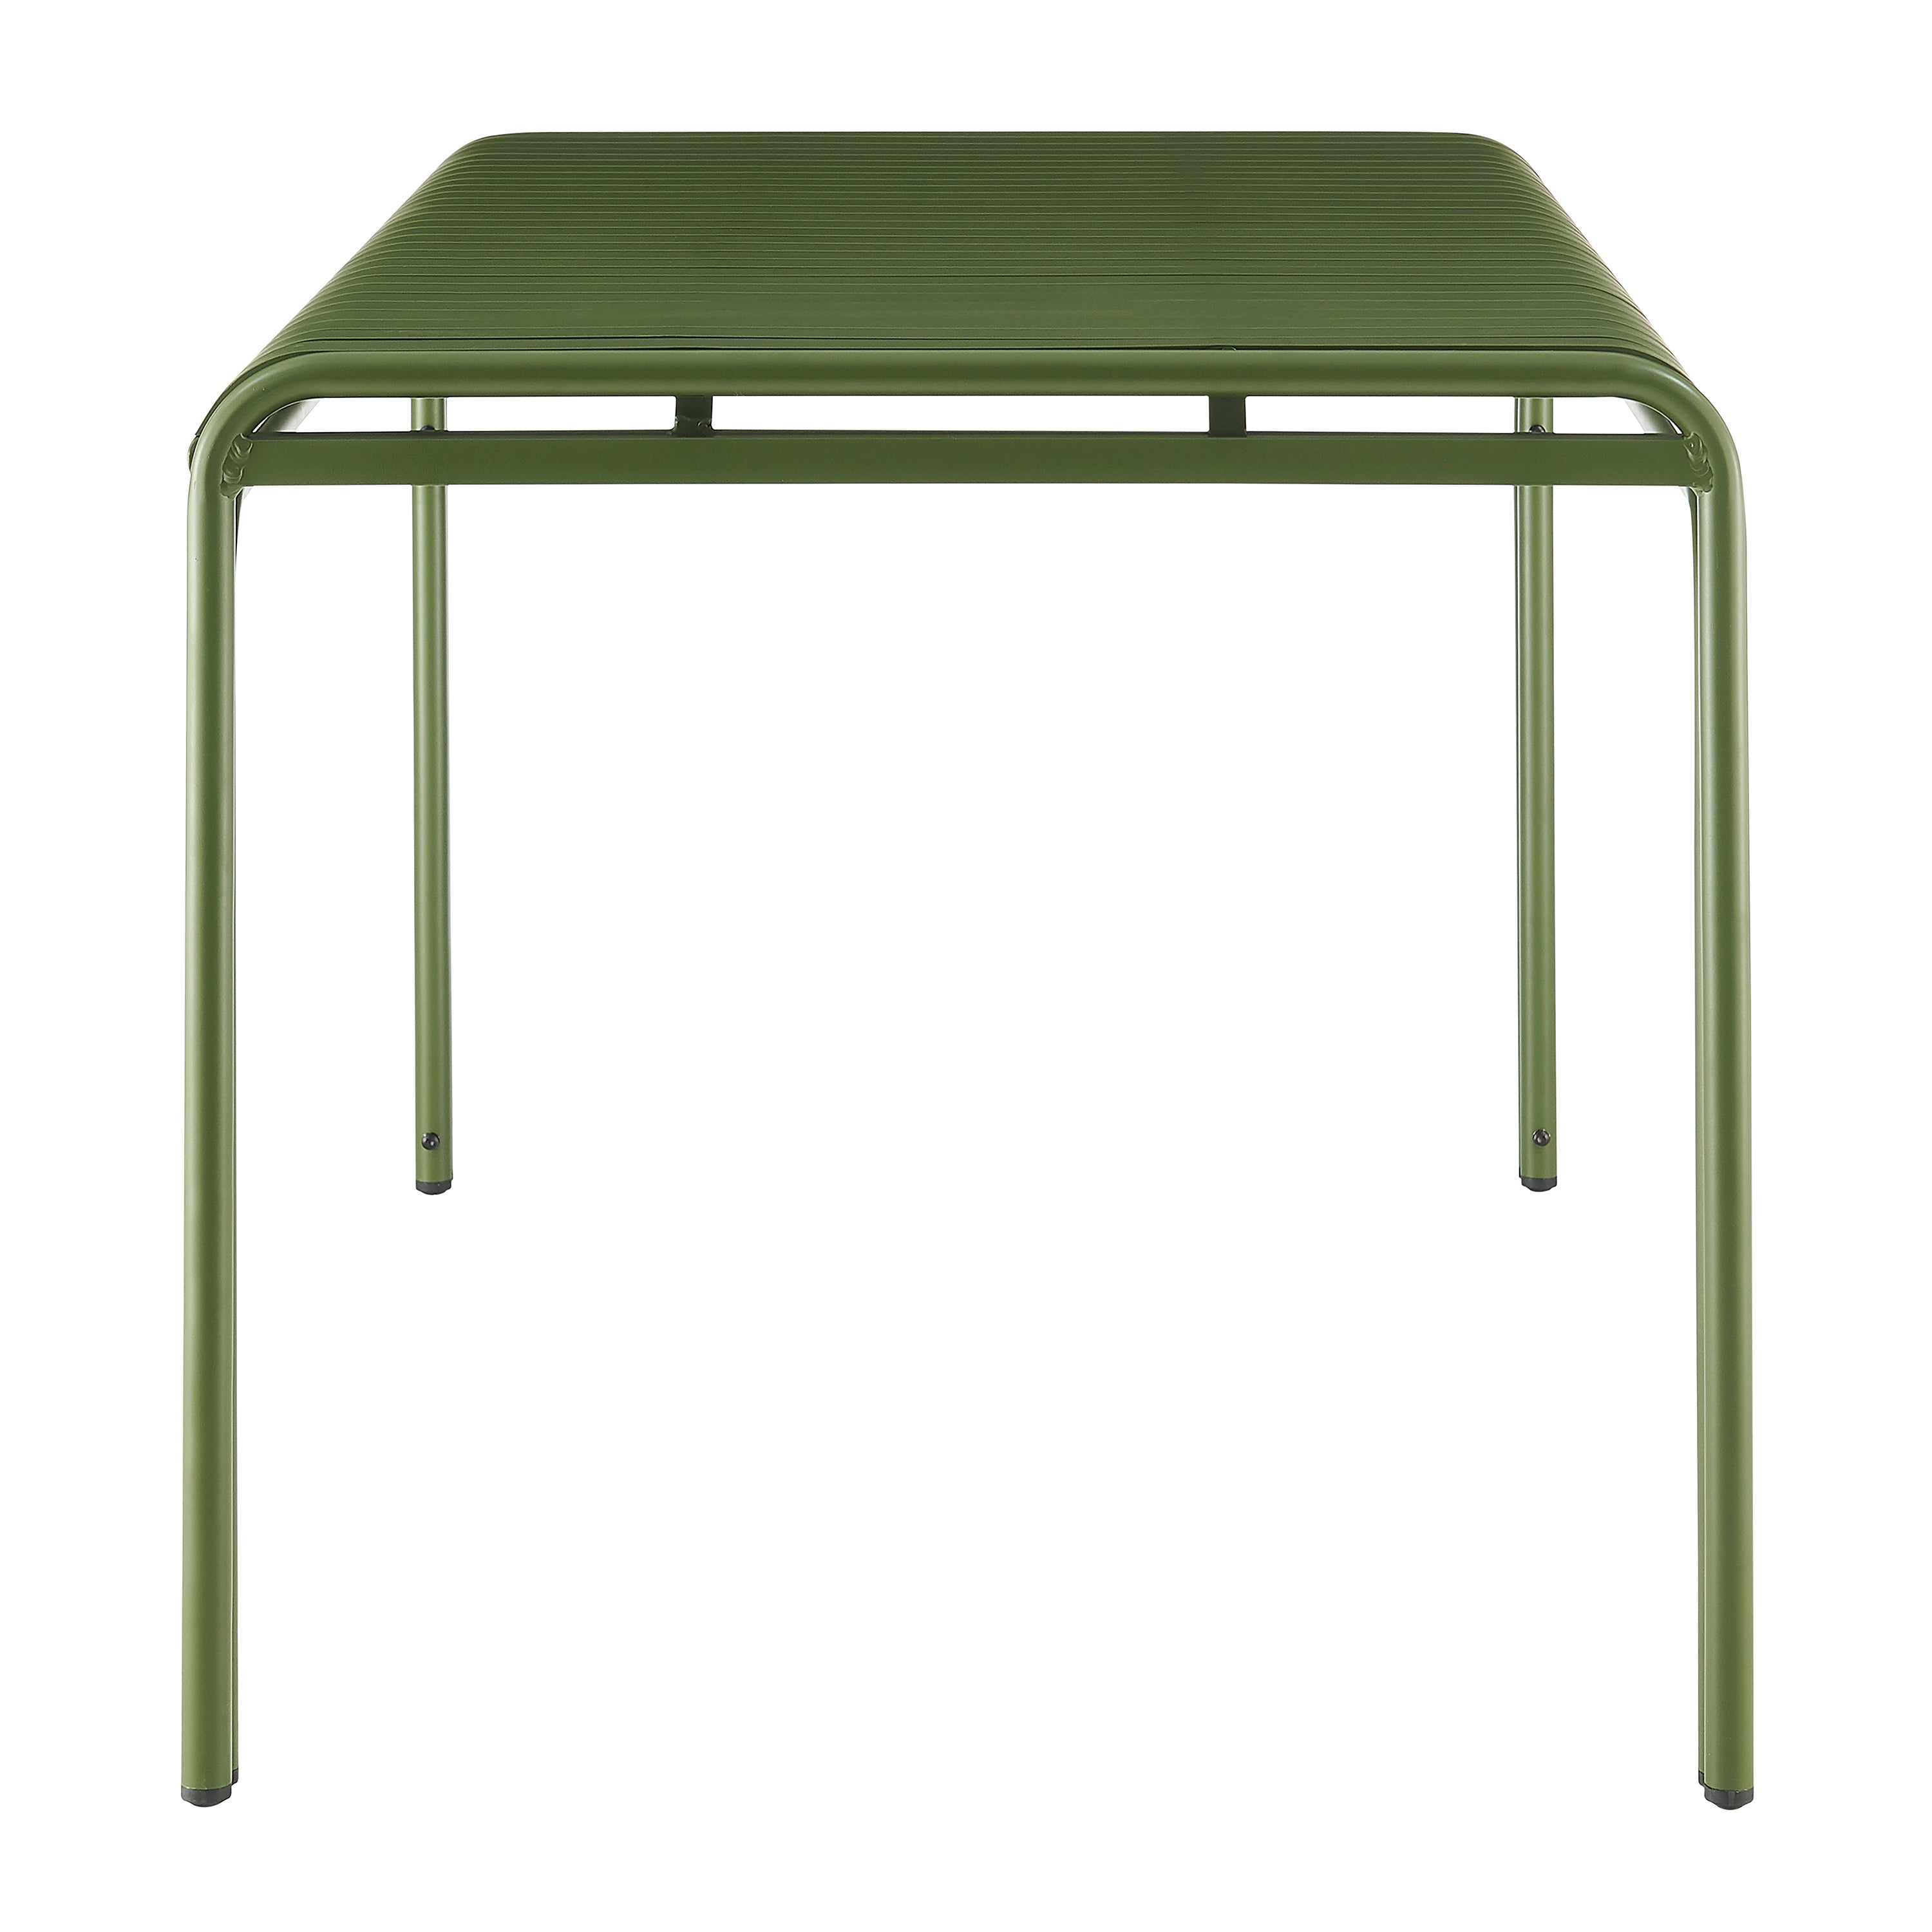 Euro Style Dining Tables - Otis Outdoor Table in Dark Green